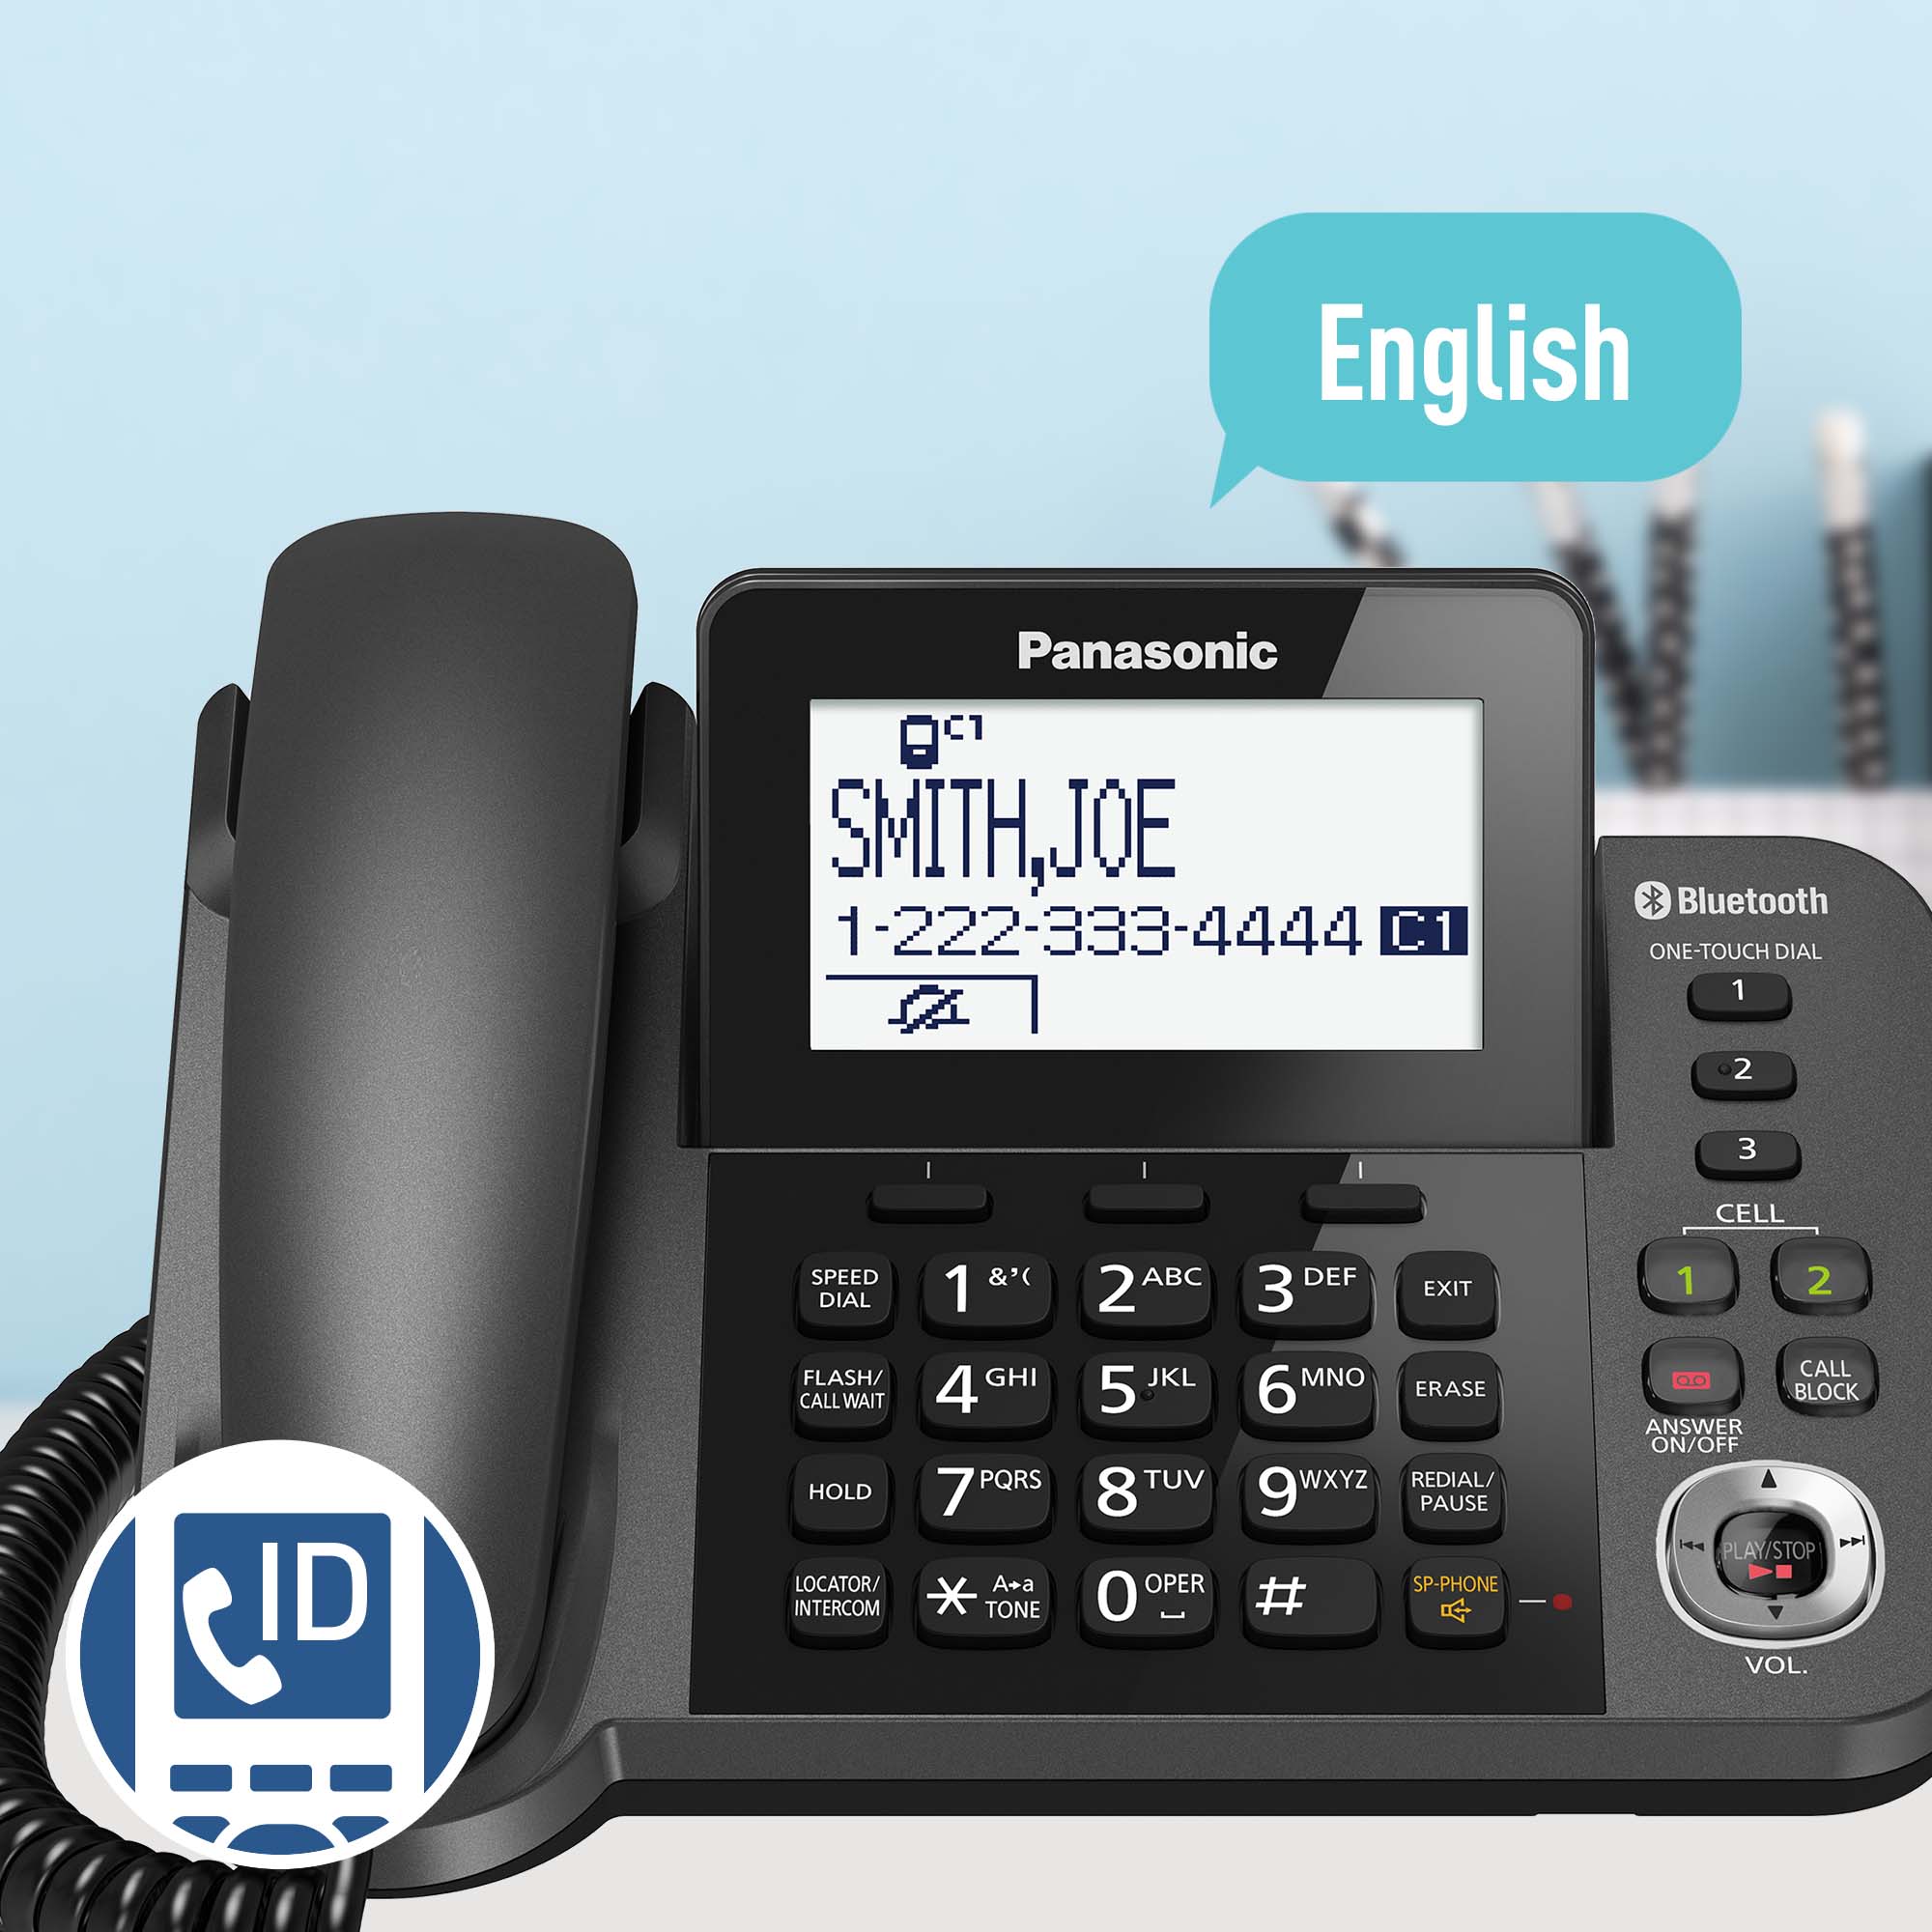 Panasonic Link2Cell Corded Corded with Digital Phone KX-TGF382M 2 Answering - Machine Handsets, System